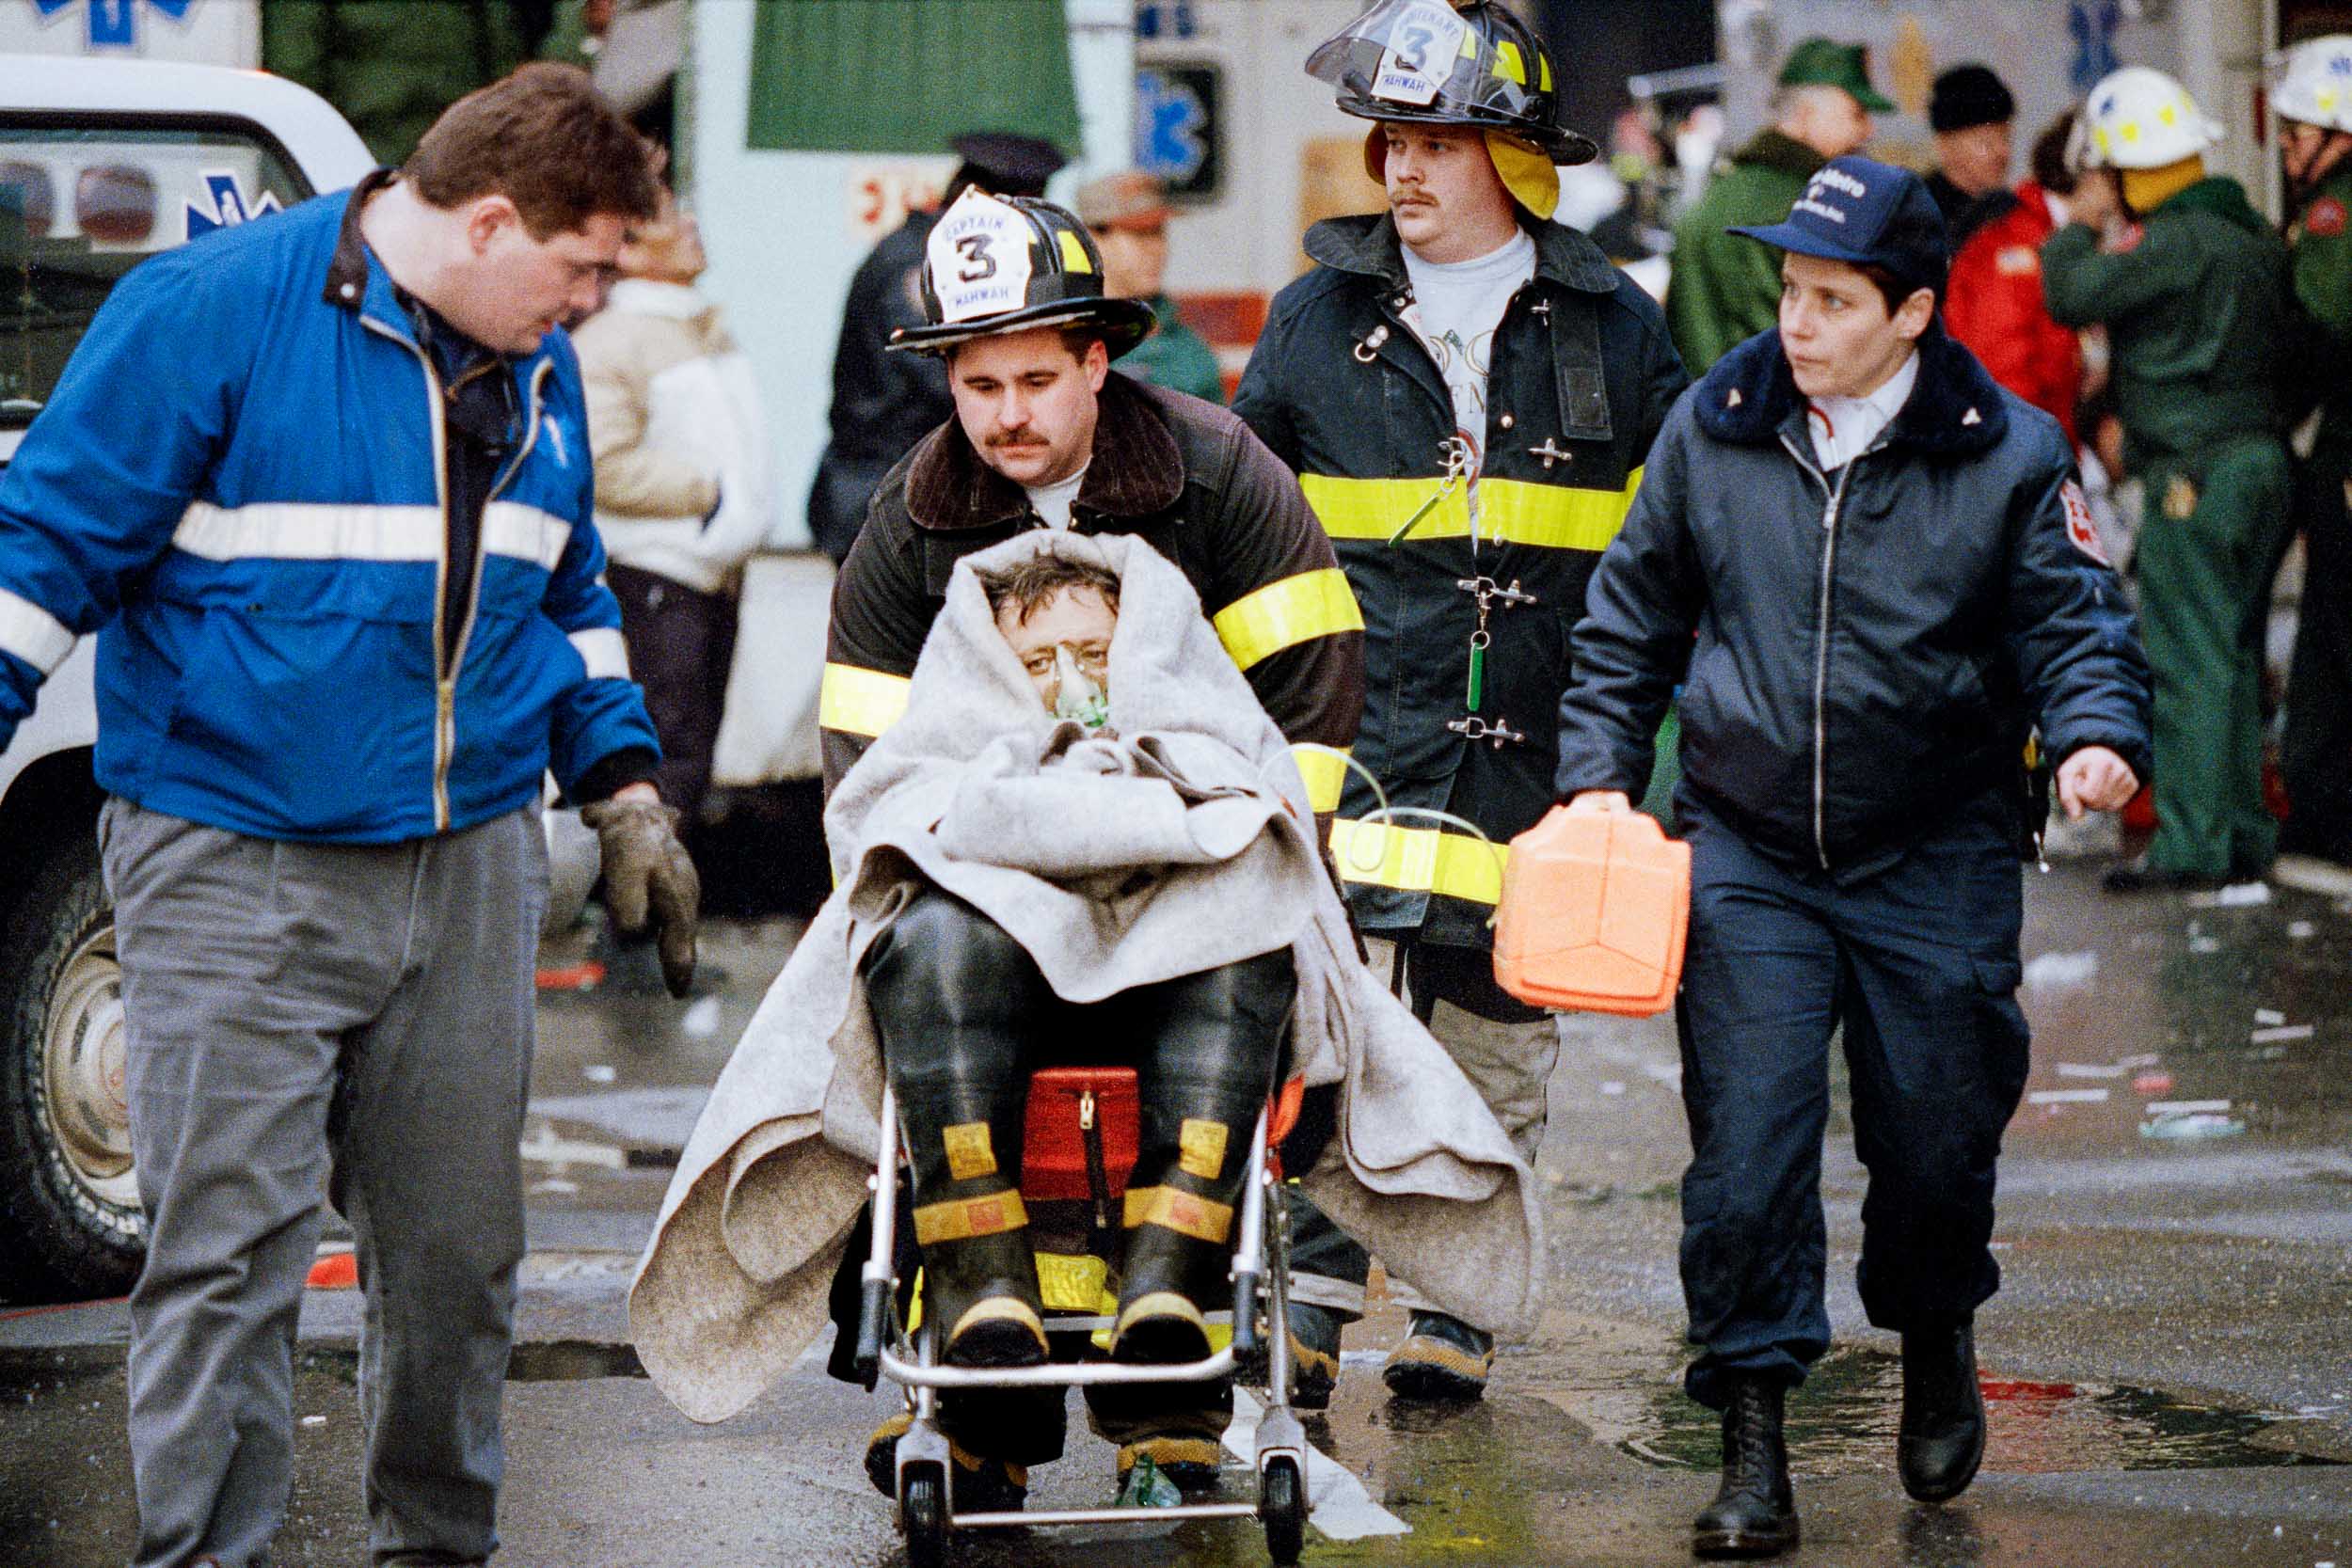 Injured fireman getting medical assistance outside of the World Trade Center, NY, 1993